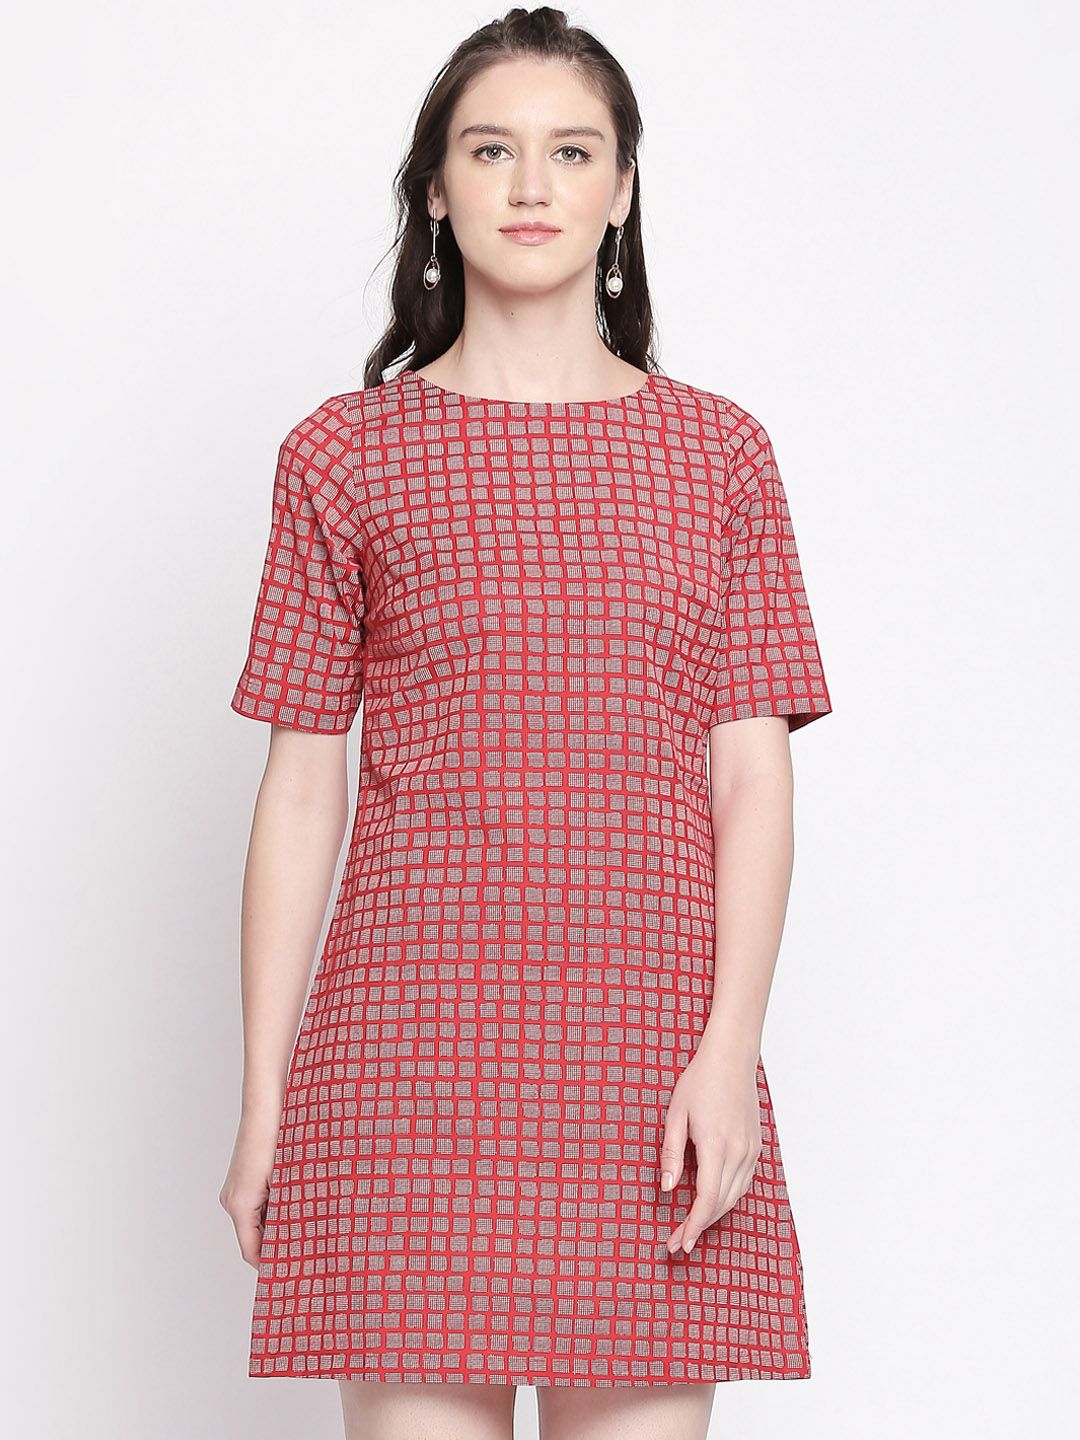 AKKRITI BY PANTALOONS Women Red & White Checked Fit and Flare Dress Price in India